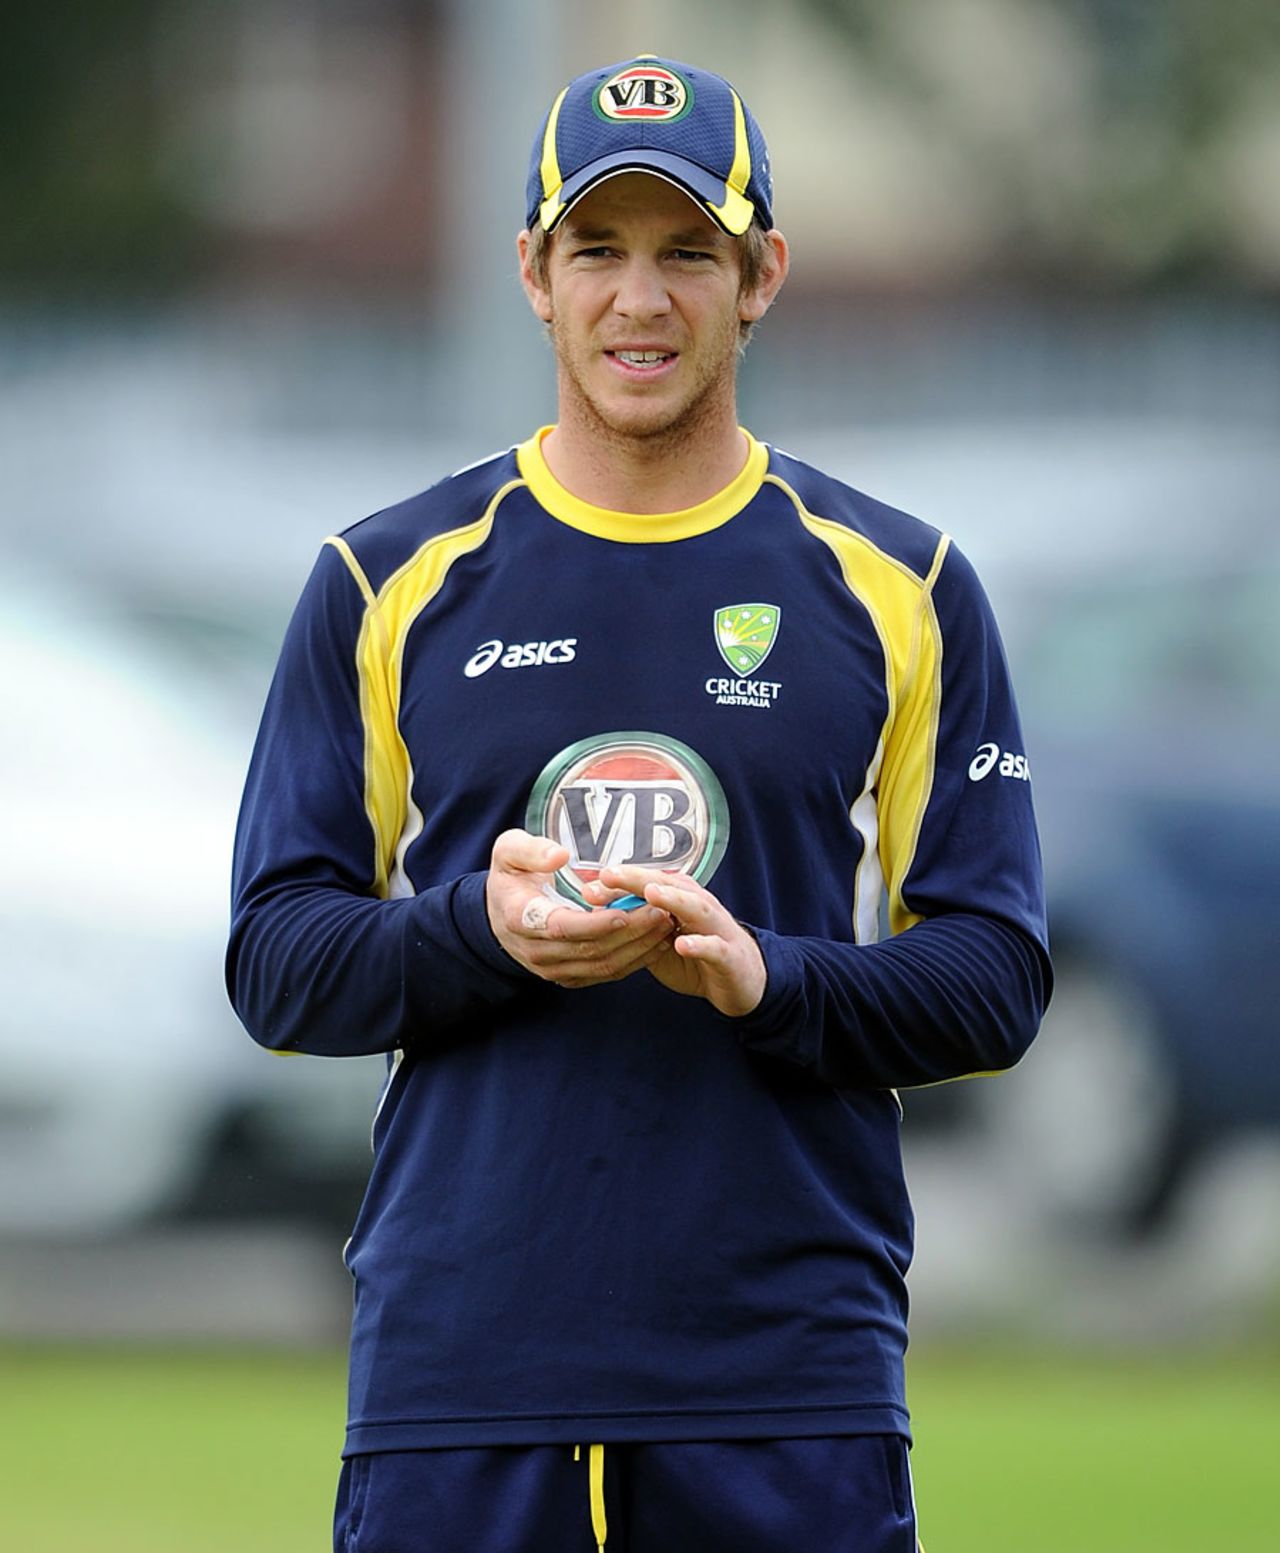 Tim Paine during a net session, Old Trafford, August 6, 2012